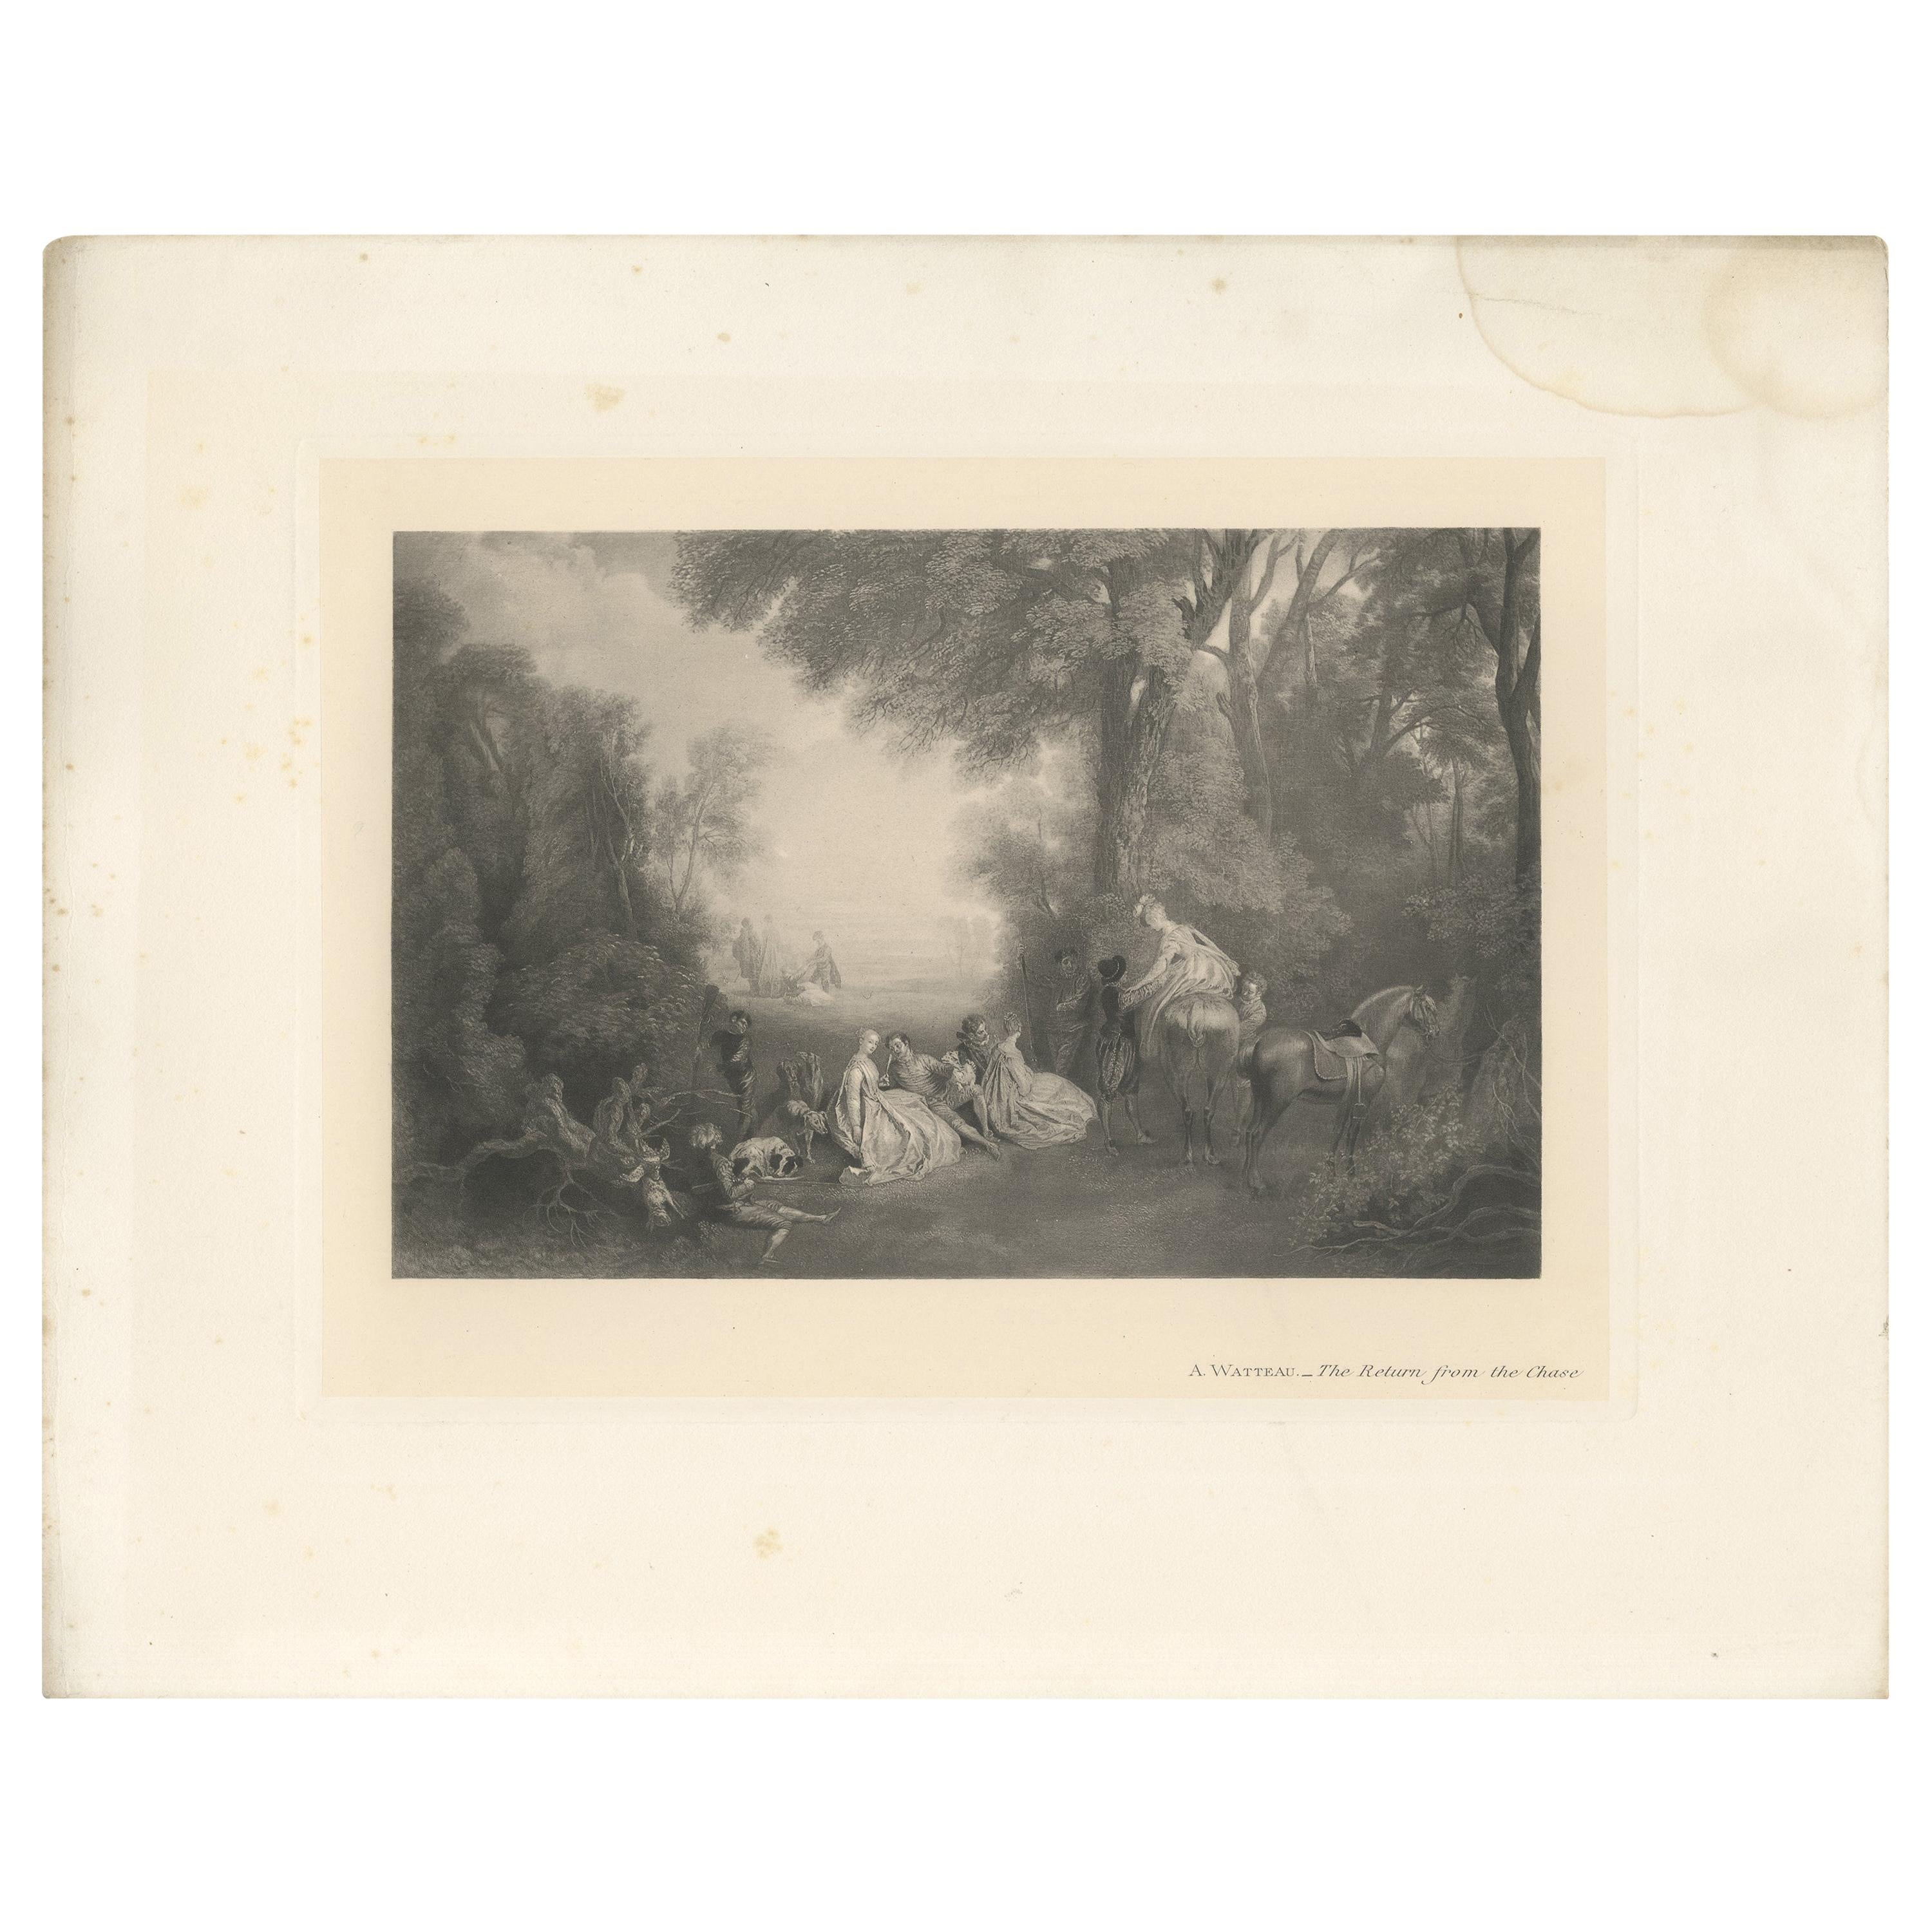 Antique Print of 'The Return from the Chase' Made After a. Watteau, 1902 For Sale